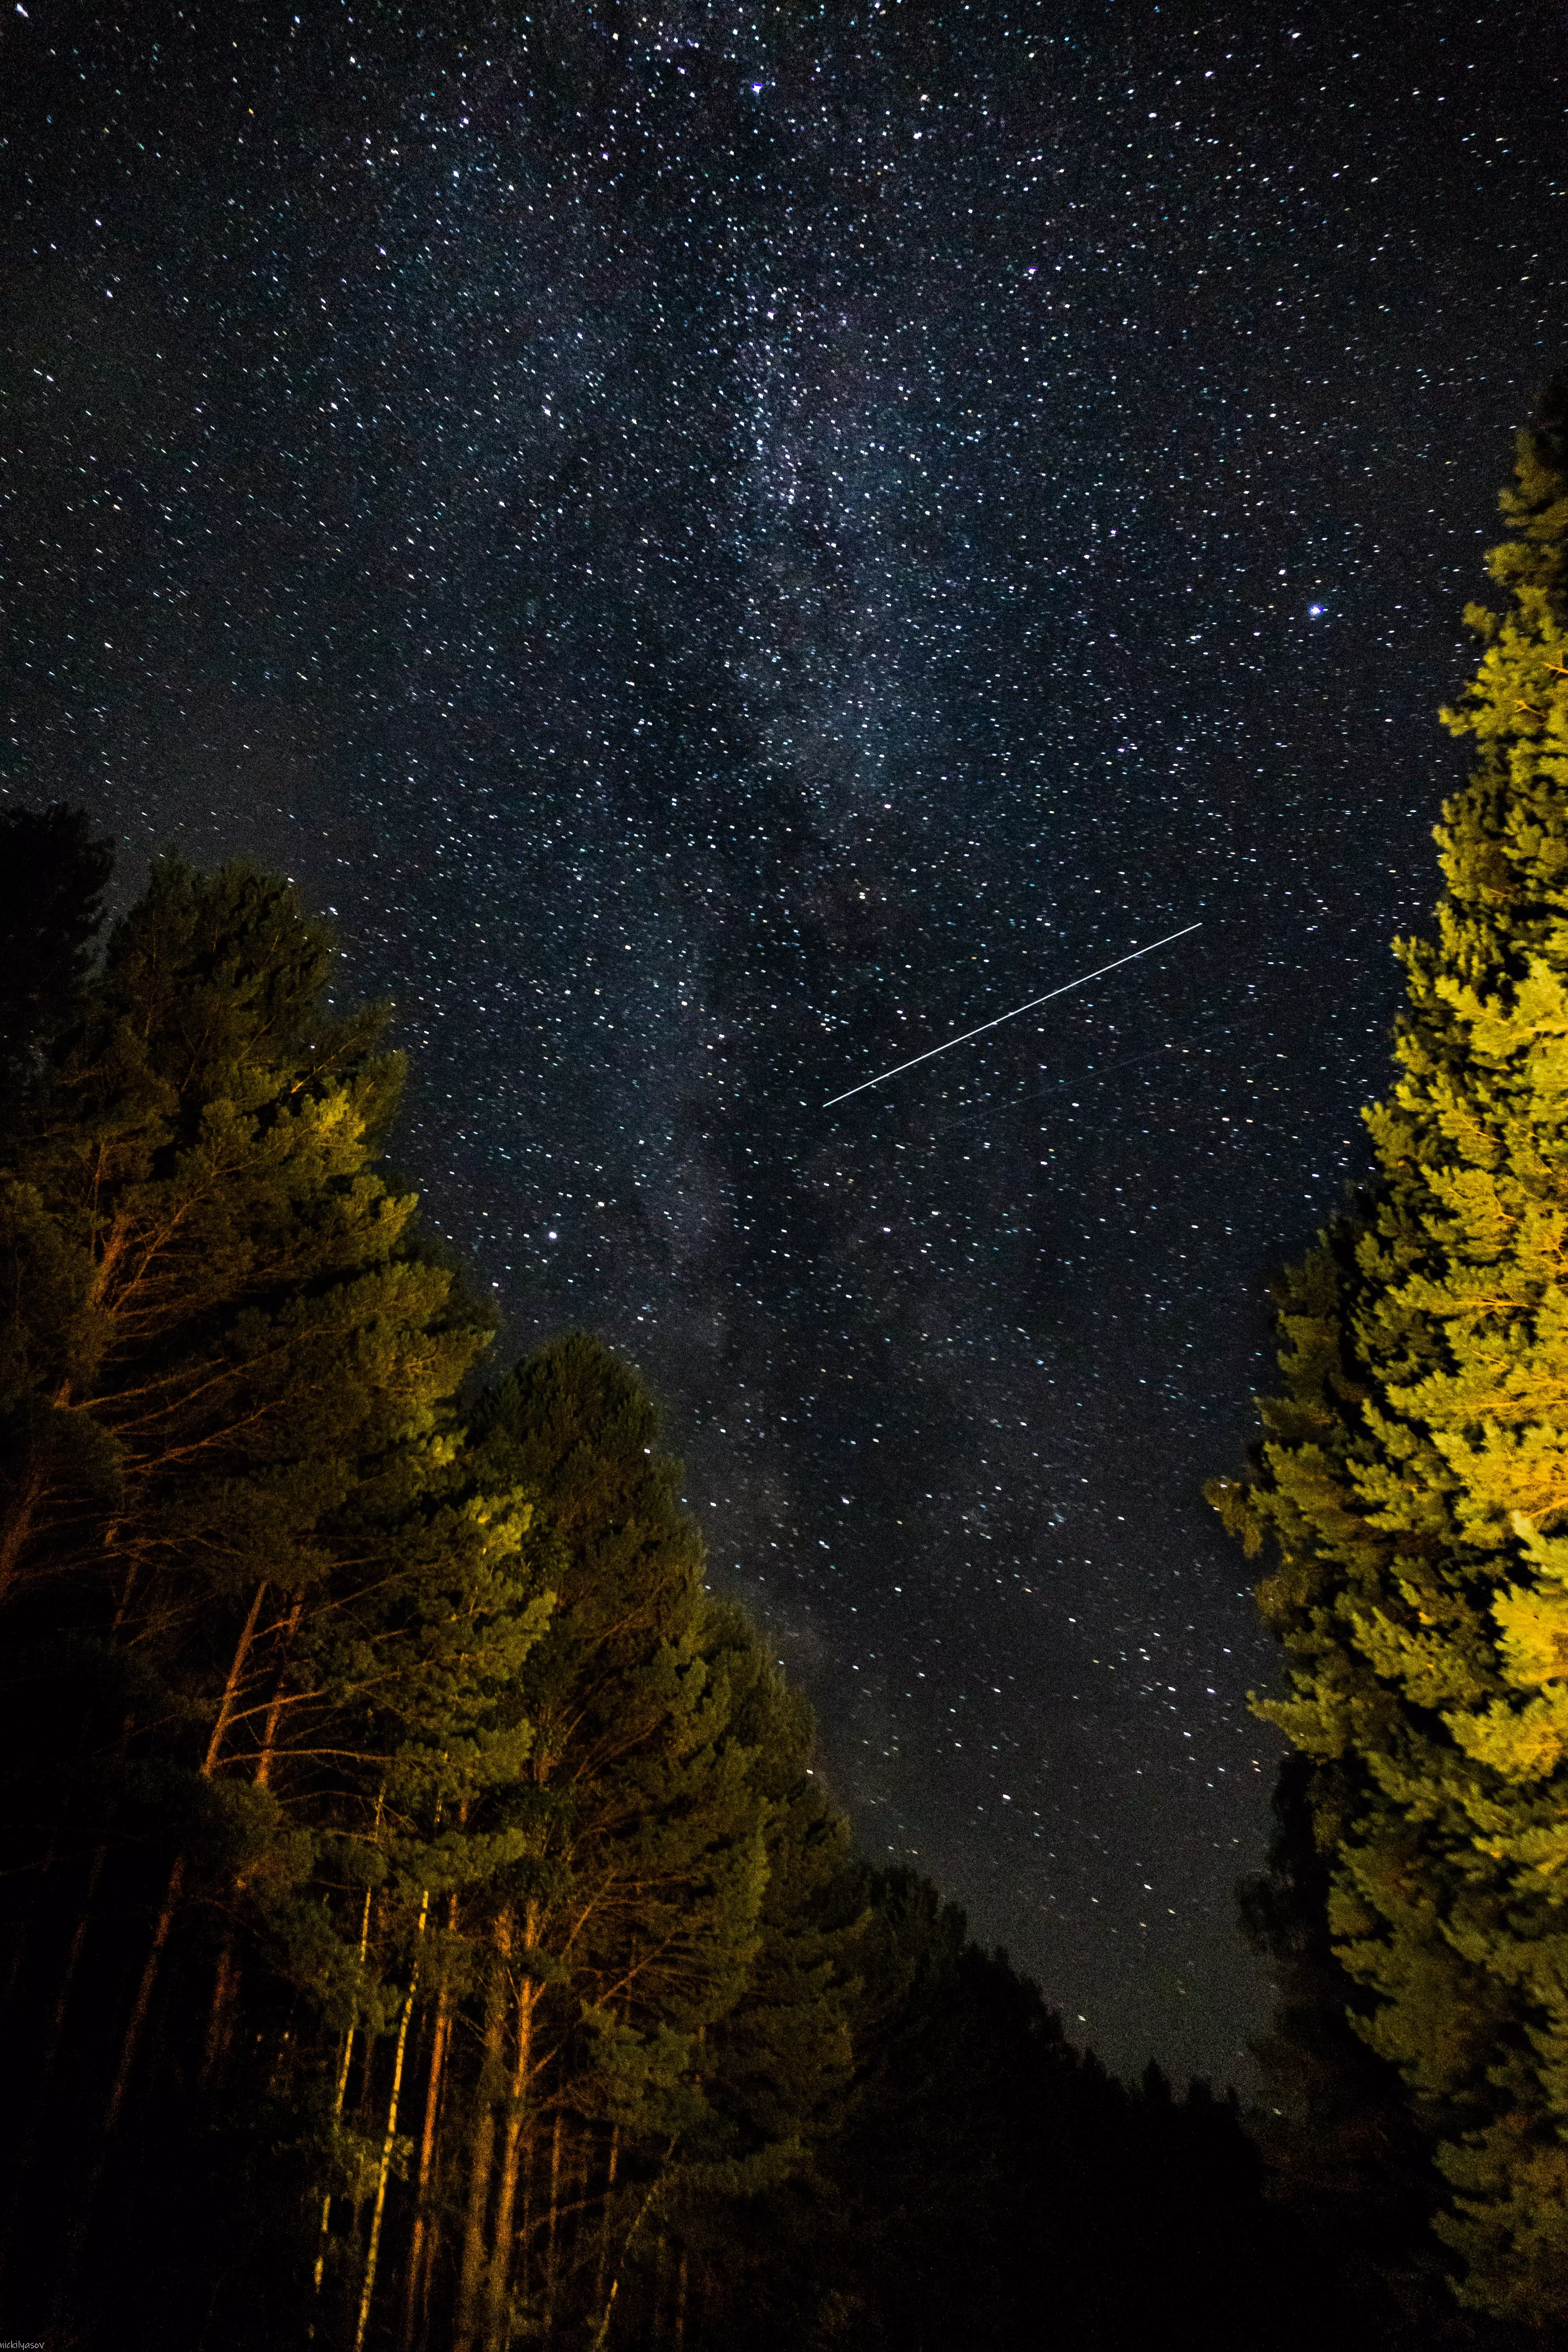 A meteor shower occurs when the Earth passes through the trail of debris left by a comet or asteroid (